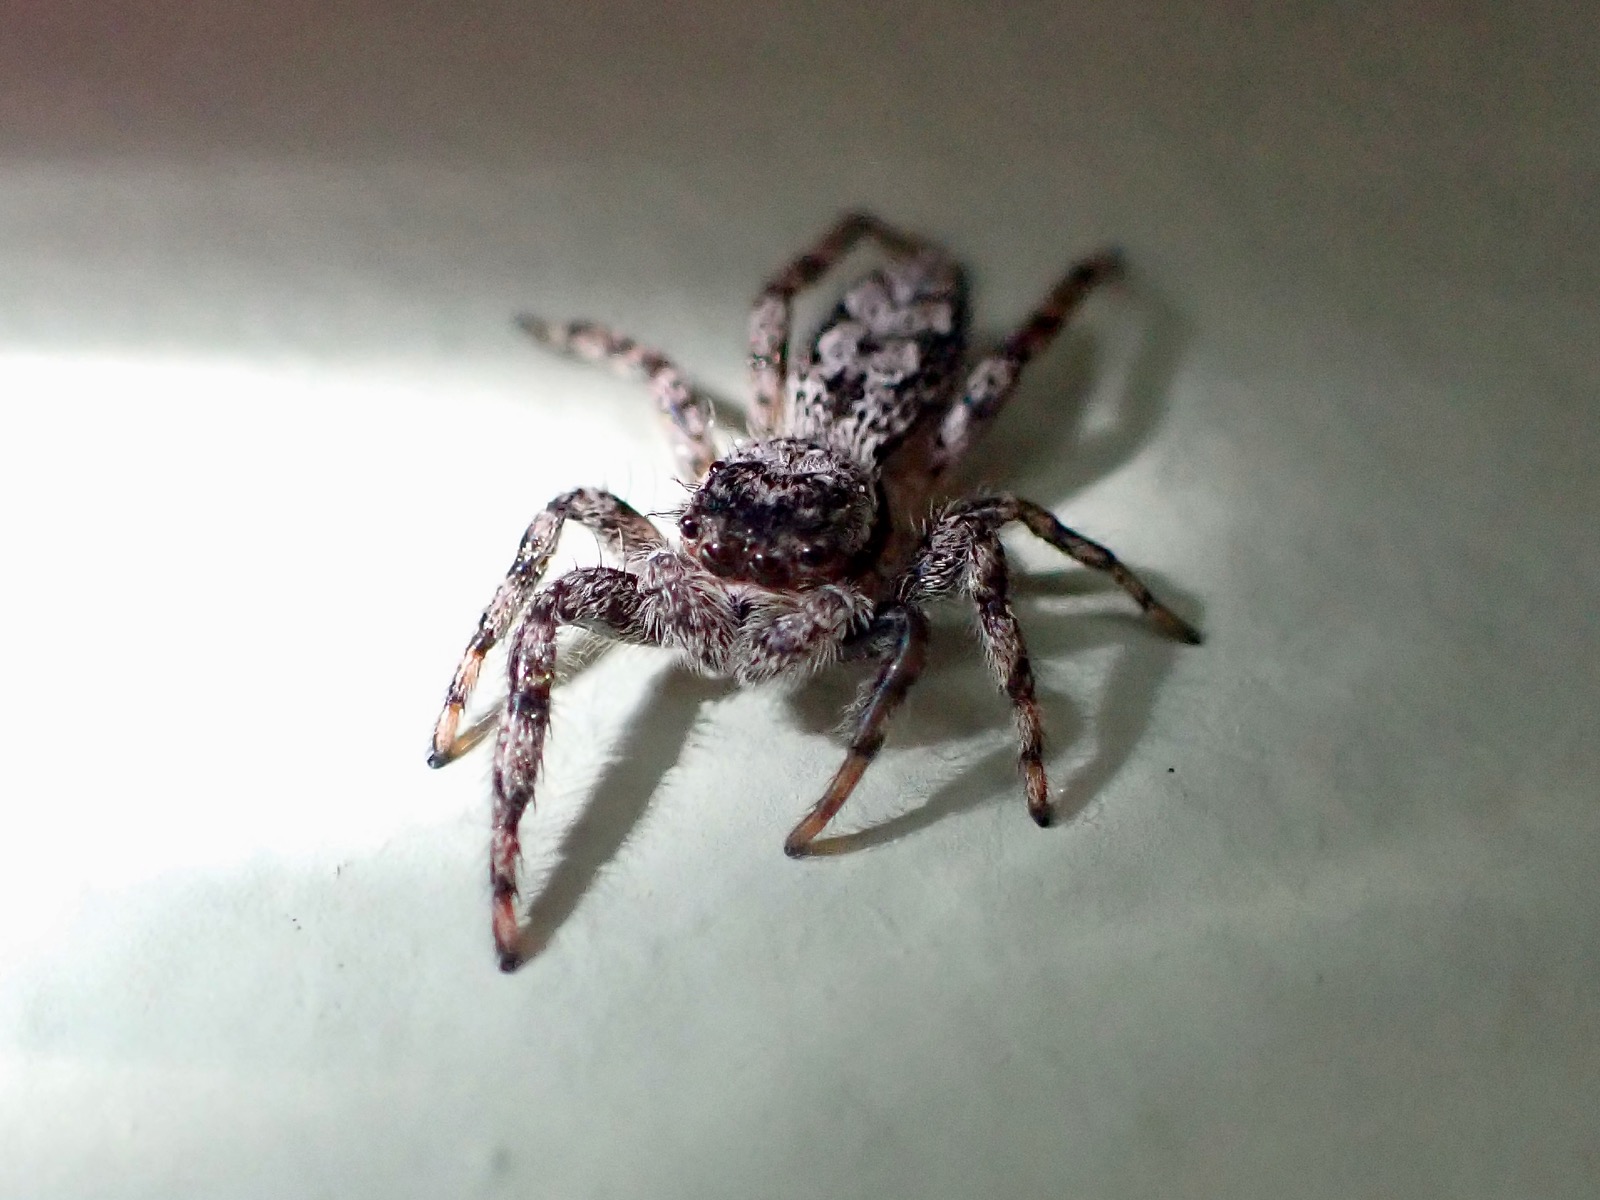 Closeup photo of a common jumping spider